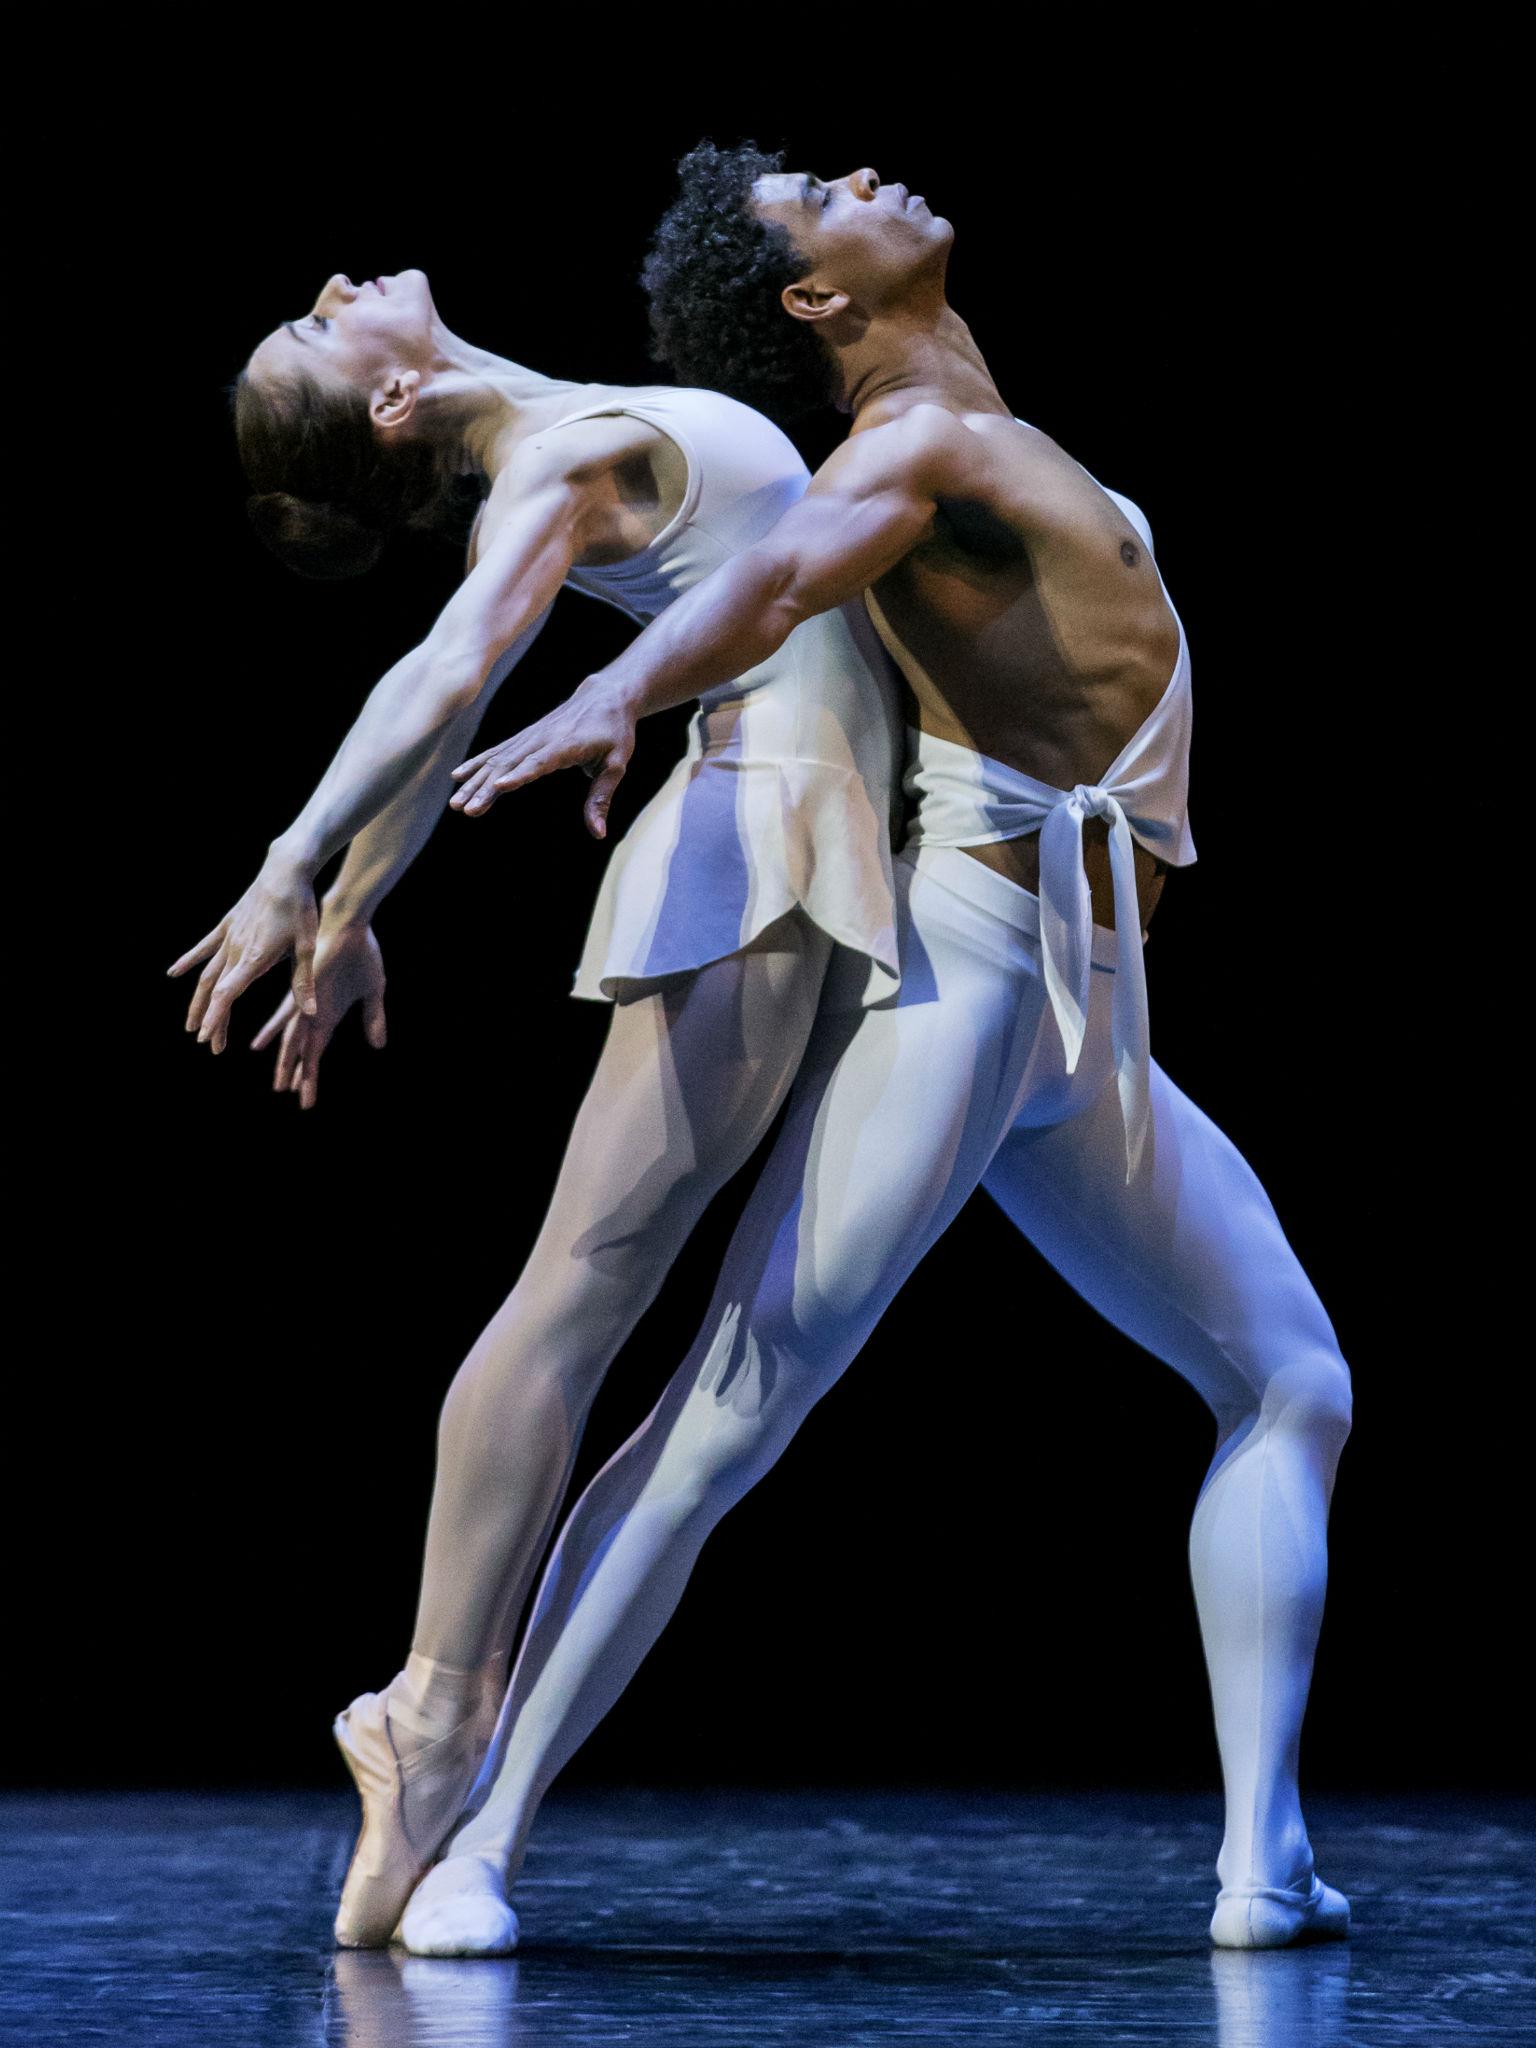 Acosta brings together an impressive cast of performers, mostly from The Royal Ballet, including Nuñez